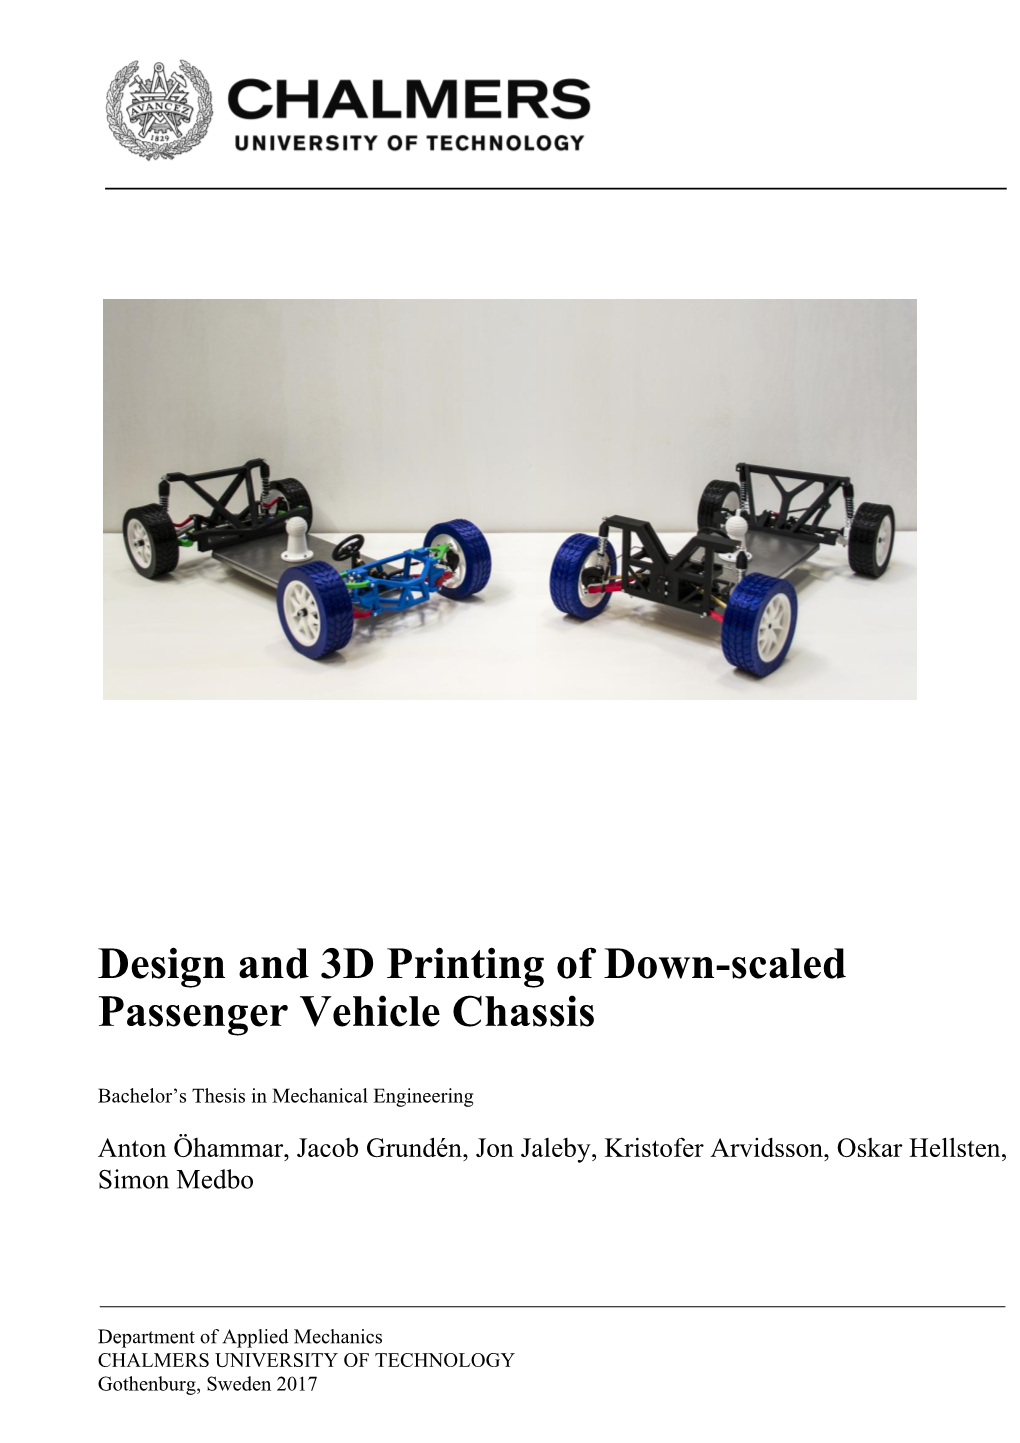 Design and 3D Printing of Down-Scaled Passenger Vehicle Chassis